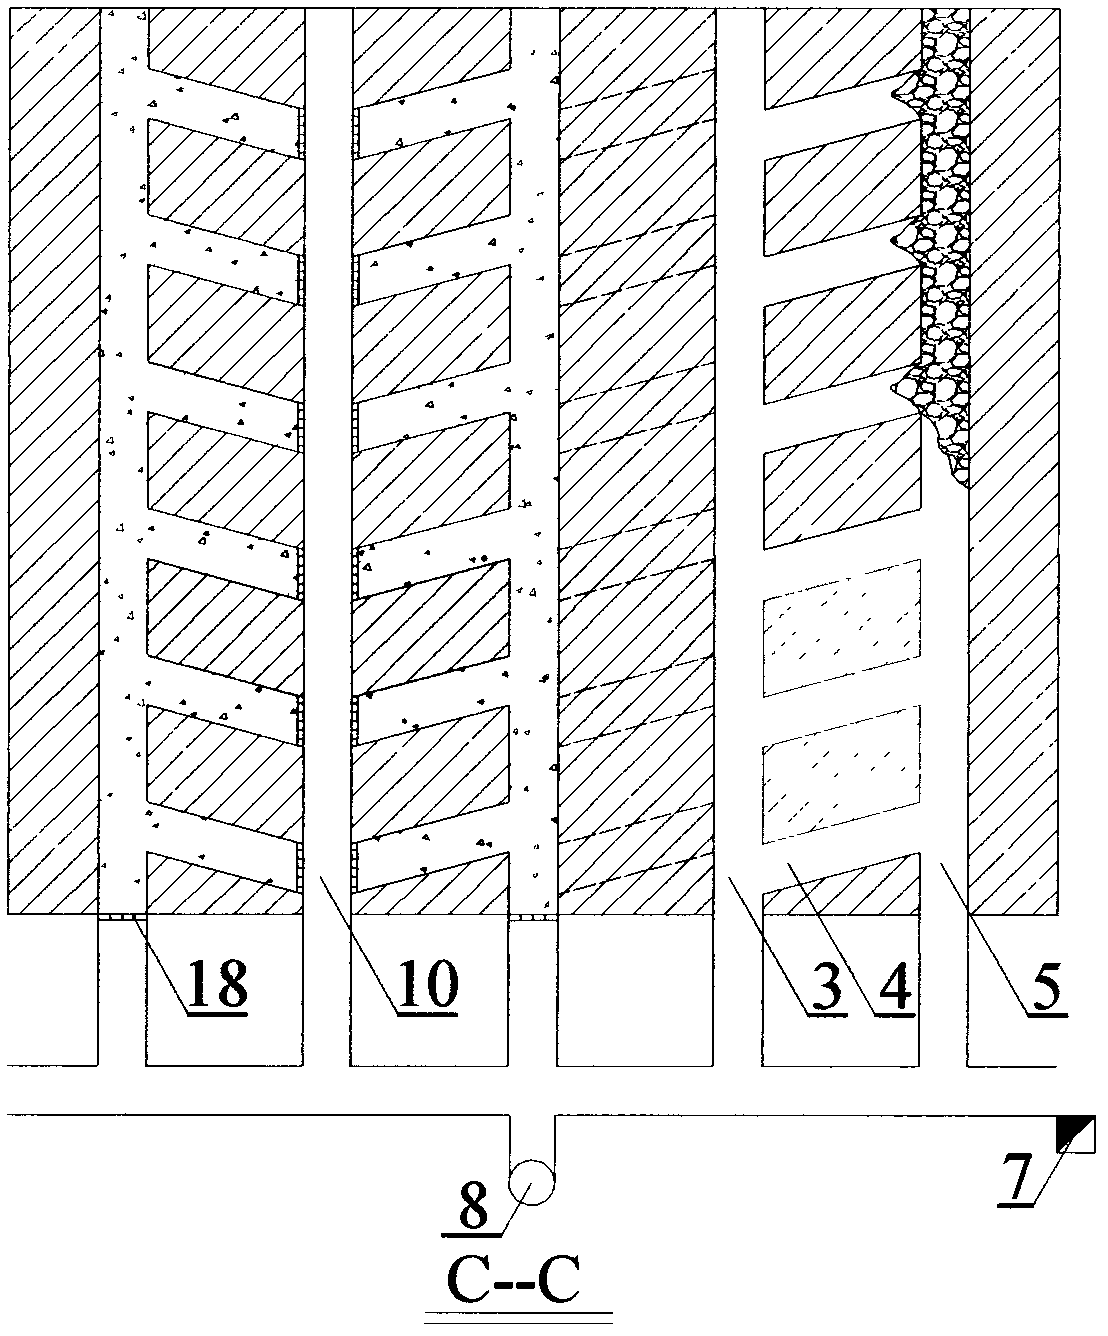 Boundary-controlled room column type sublevel open stoping subsequent stage filling mining method